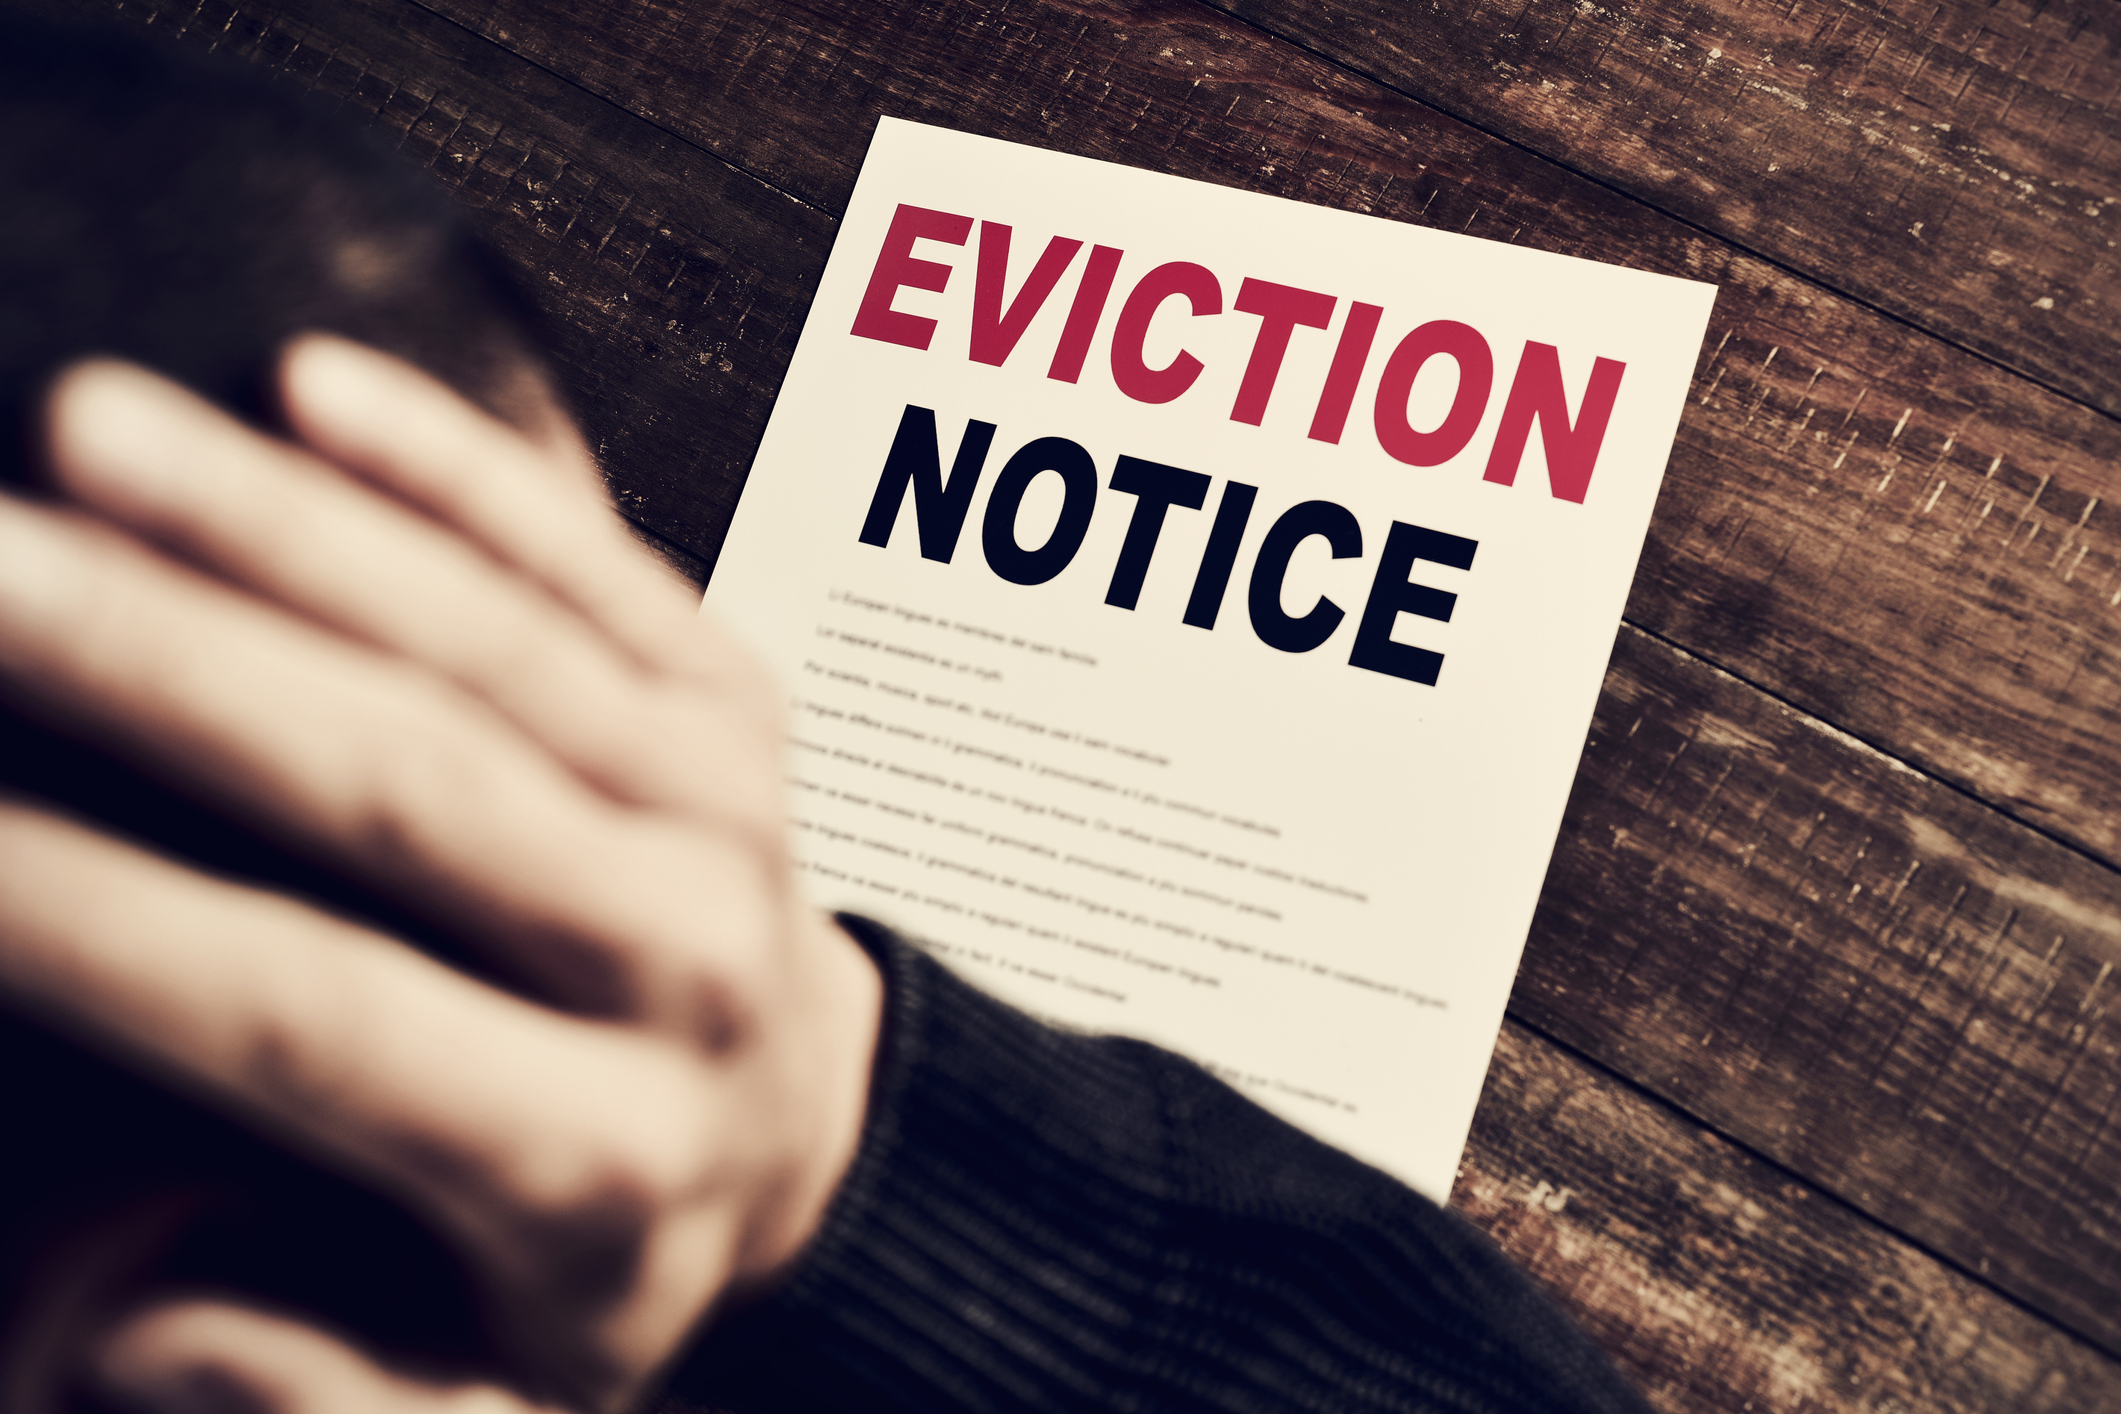 Return of Evictions and Foreclosures during COVID?